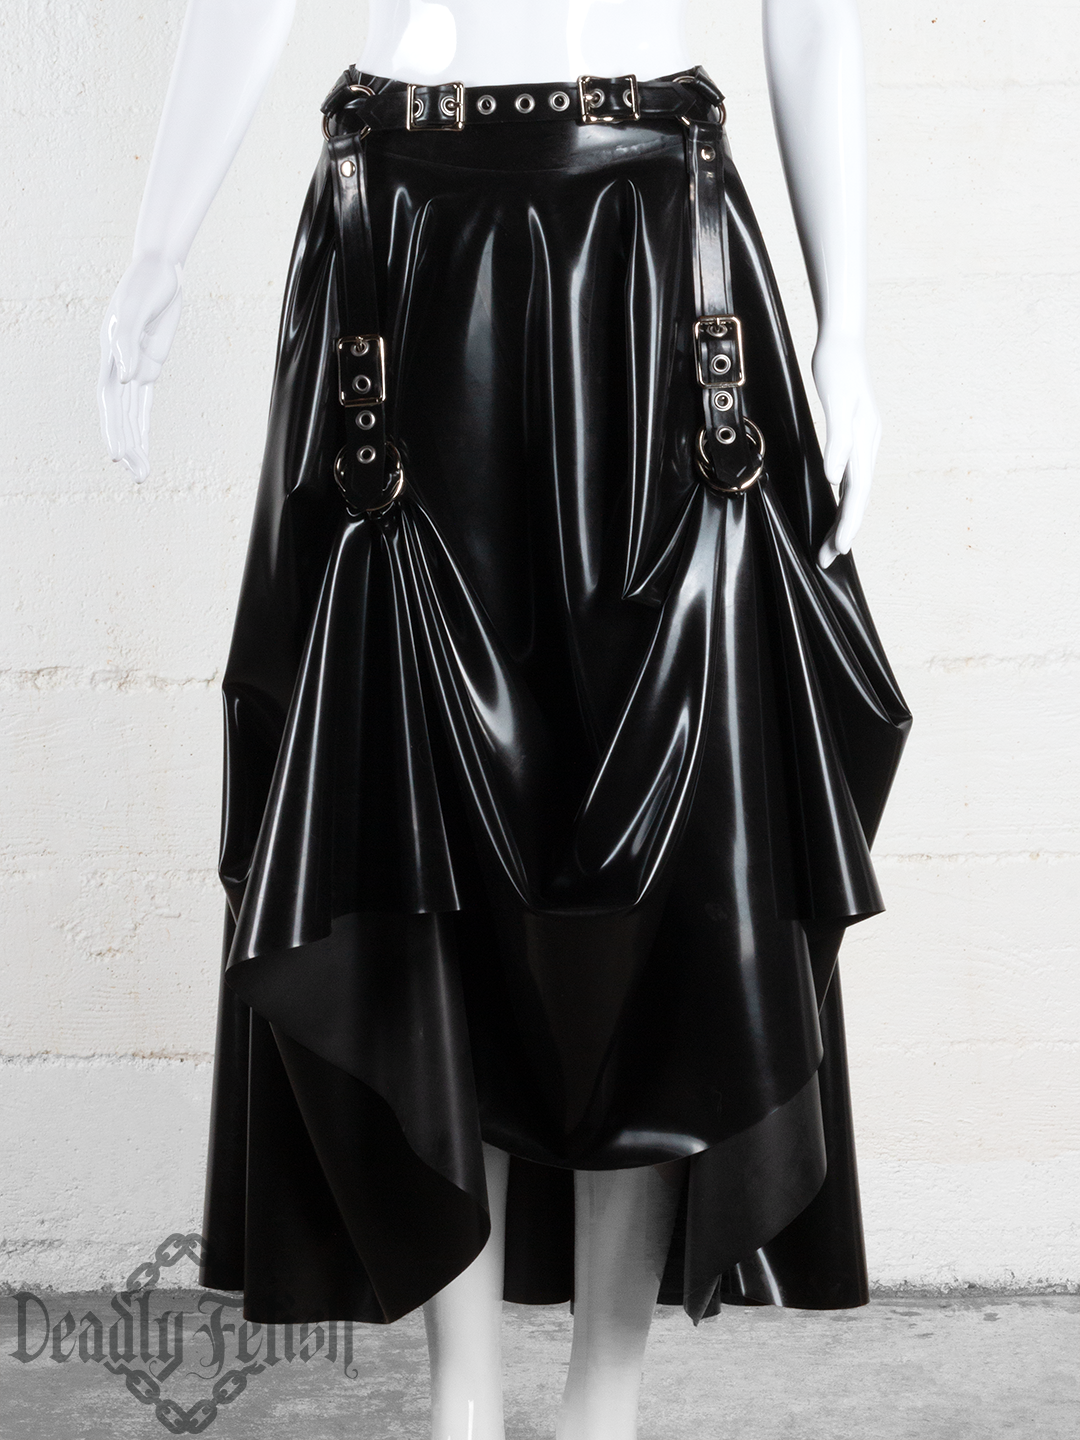 Deadly Fetish Made-to-Order Latex: Harness Addition #23 Utility Rings